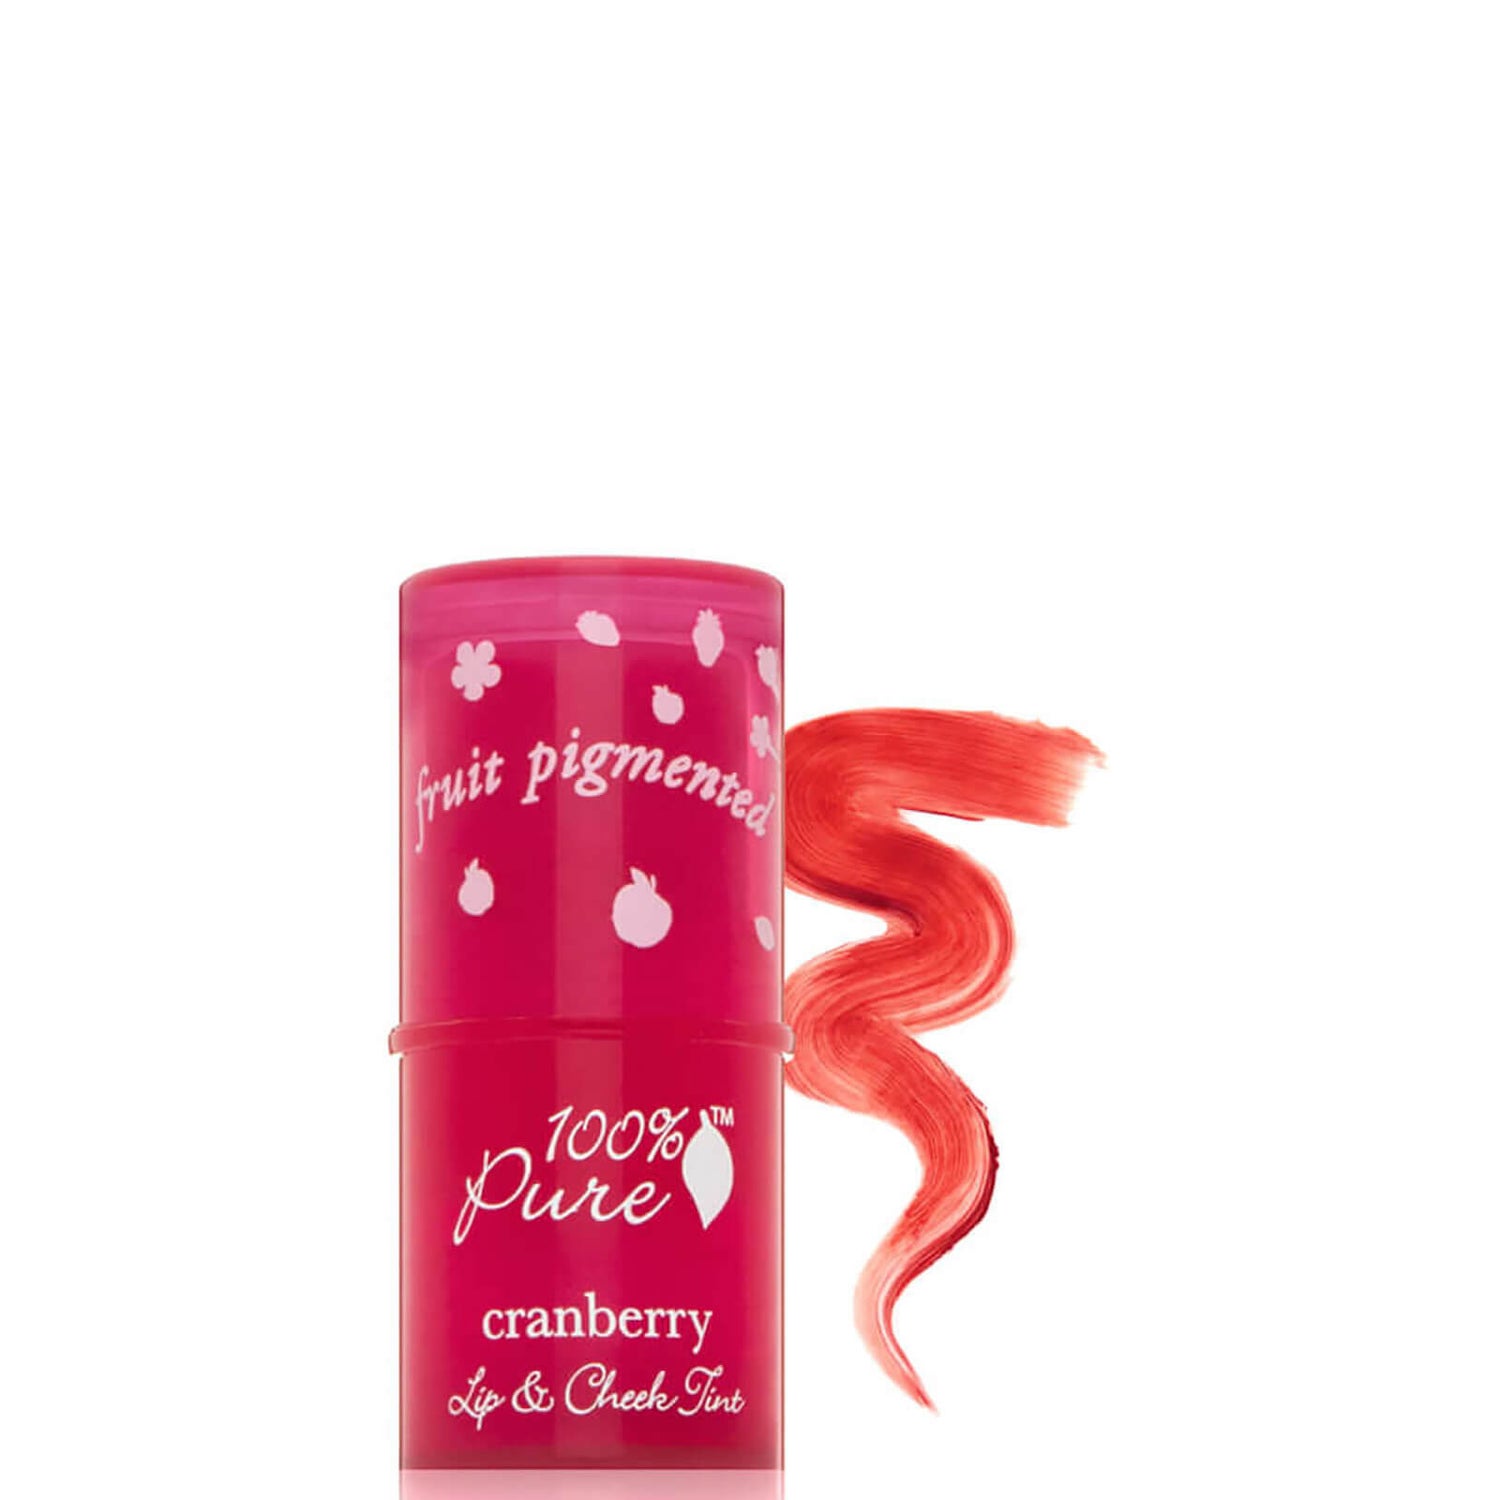 100% Pure Fruit Pigmented Lip and Cheek Tint - Cranberry Glow (0.26 oz.)